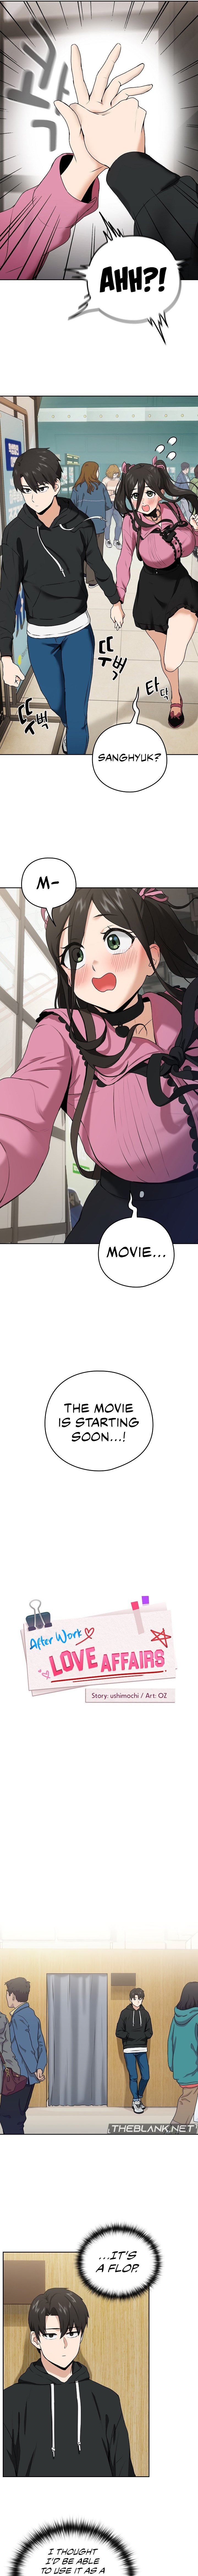 after-work-love-affairs-chap-4-1